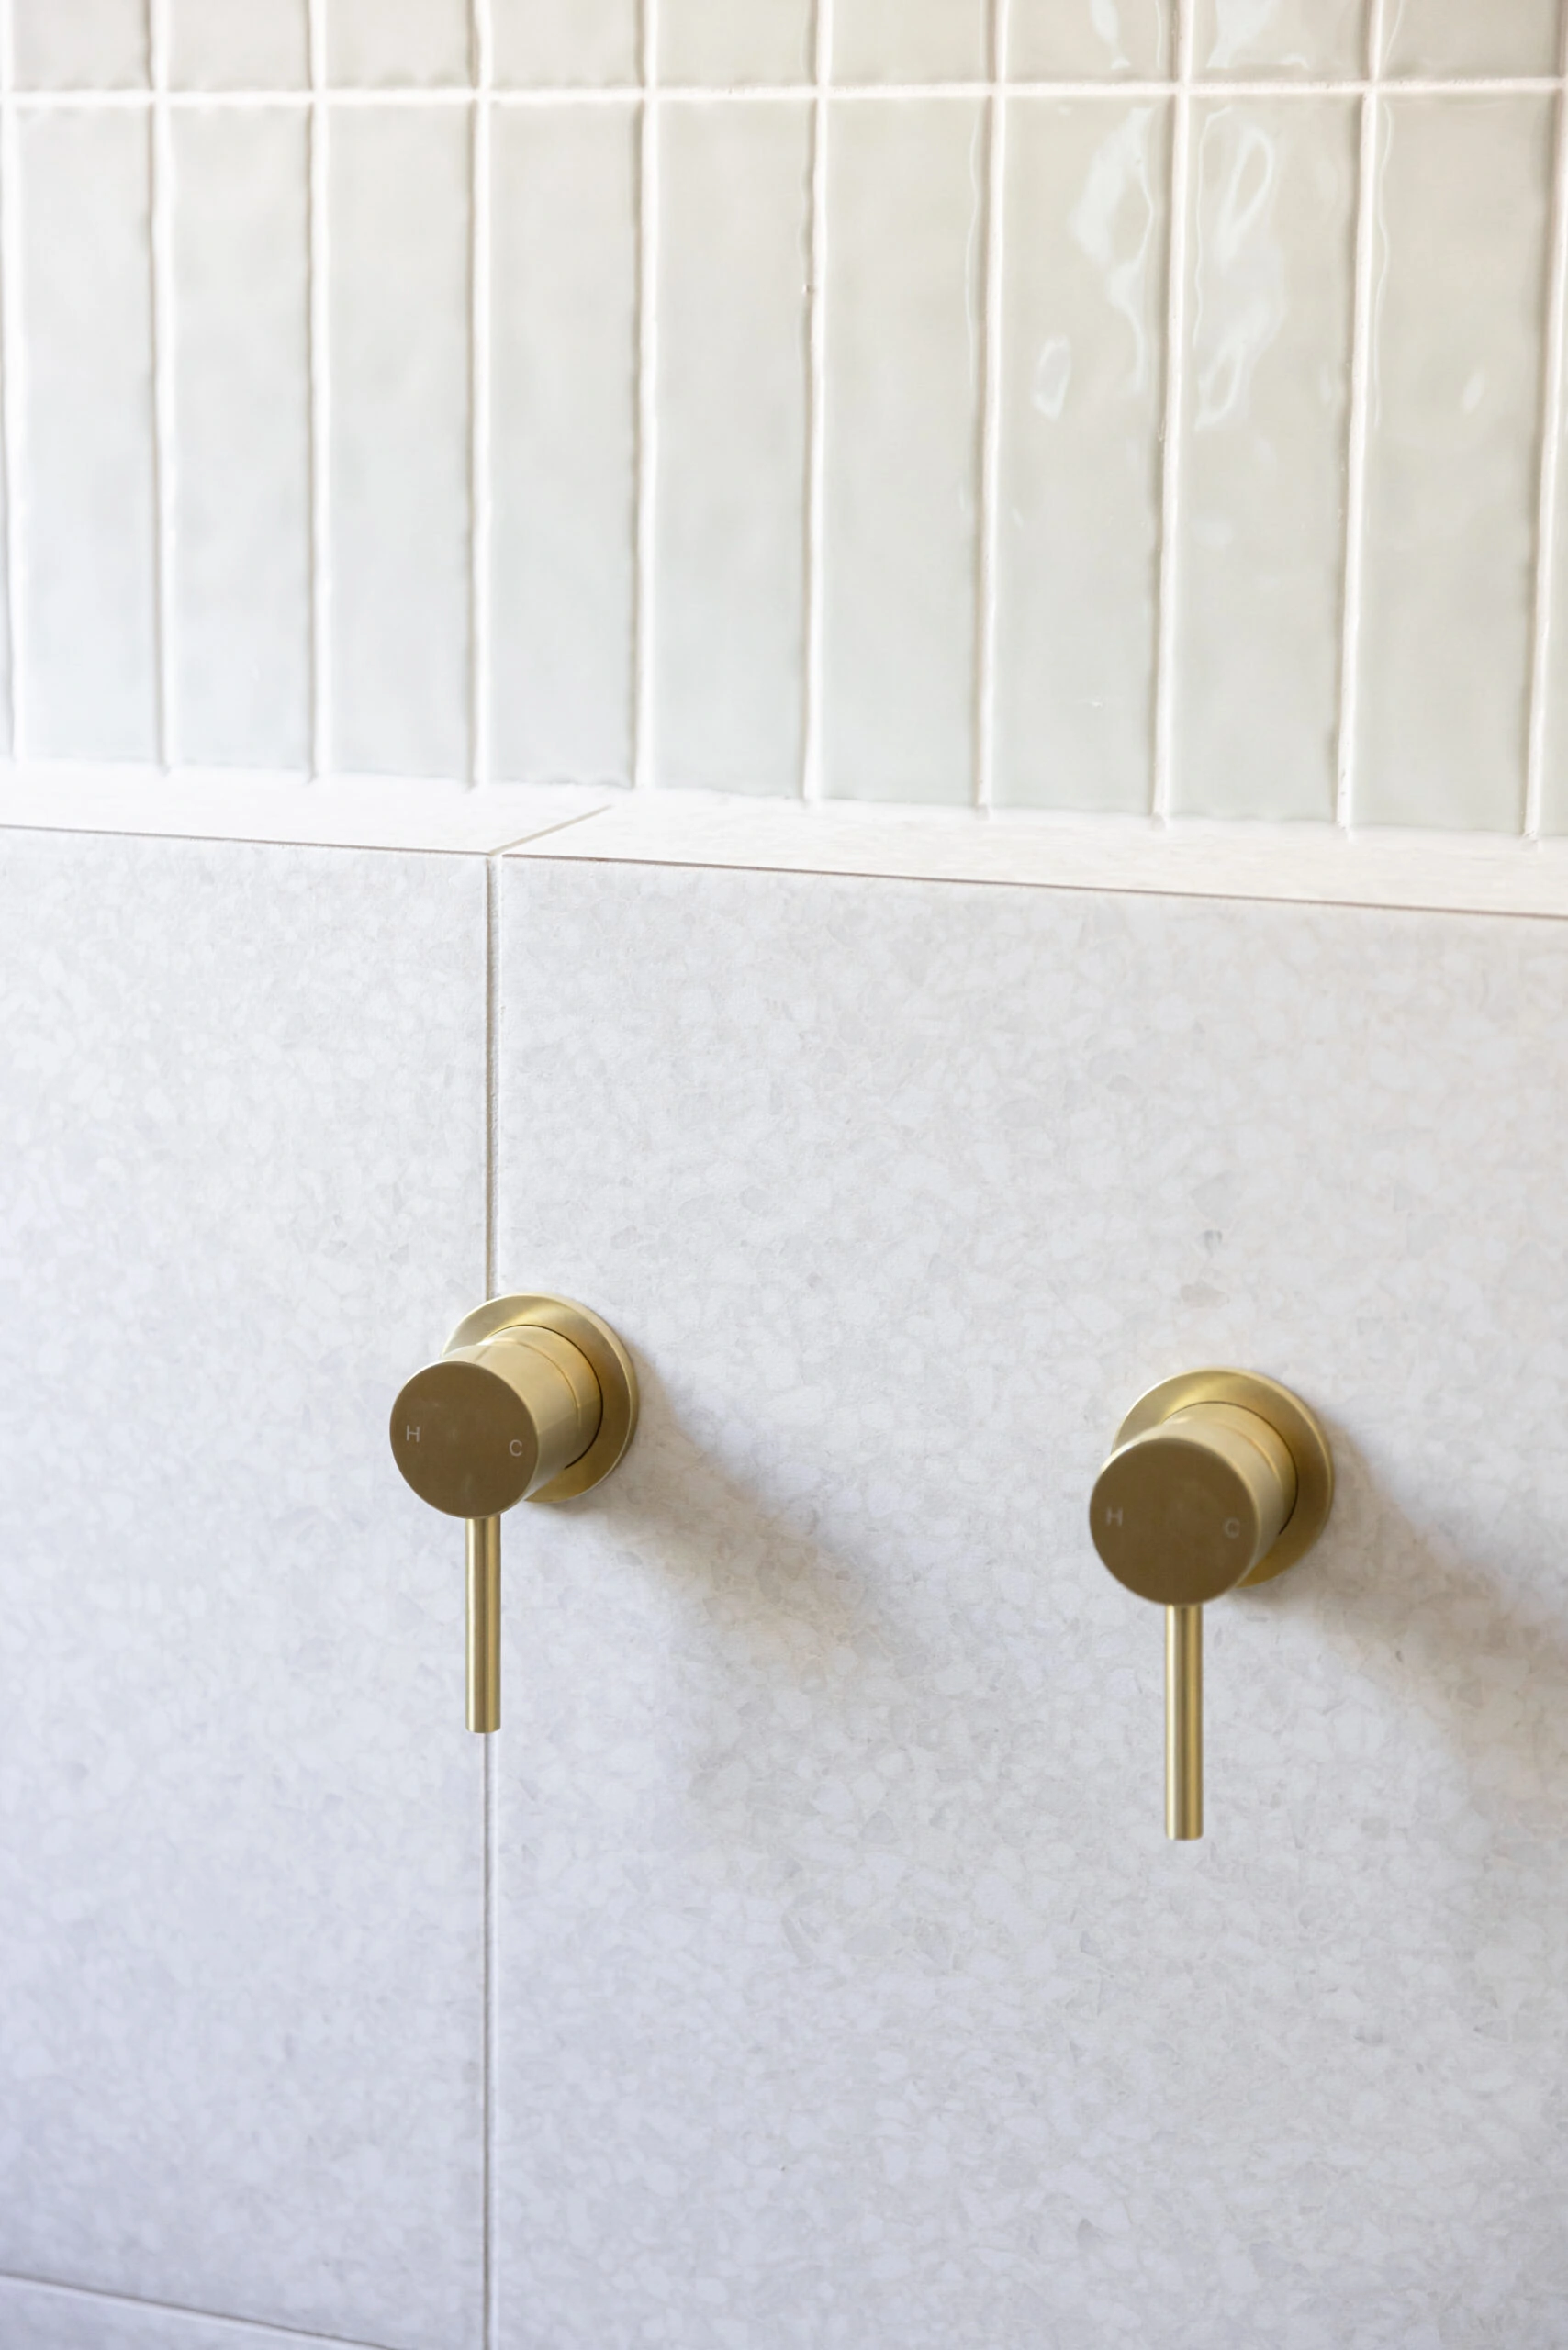 Gold taps on light tiles showing the details of a bathroom renovation